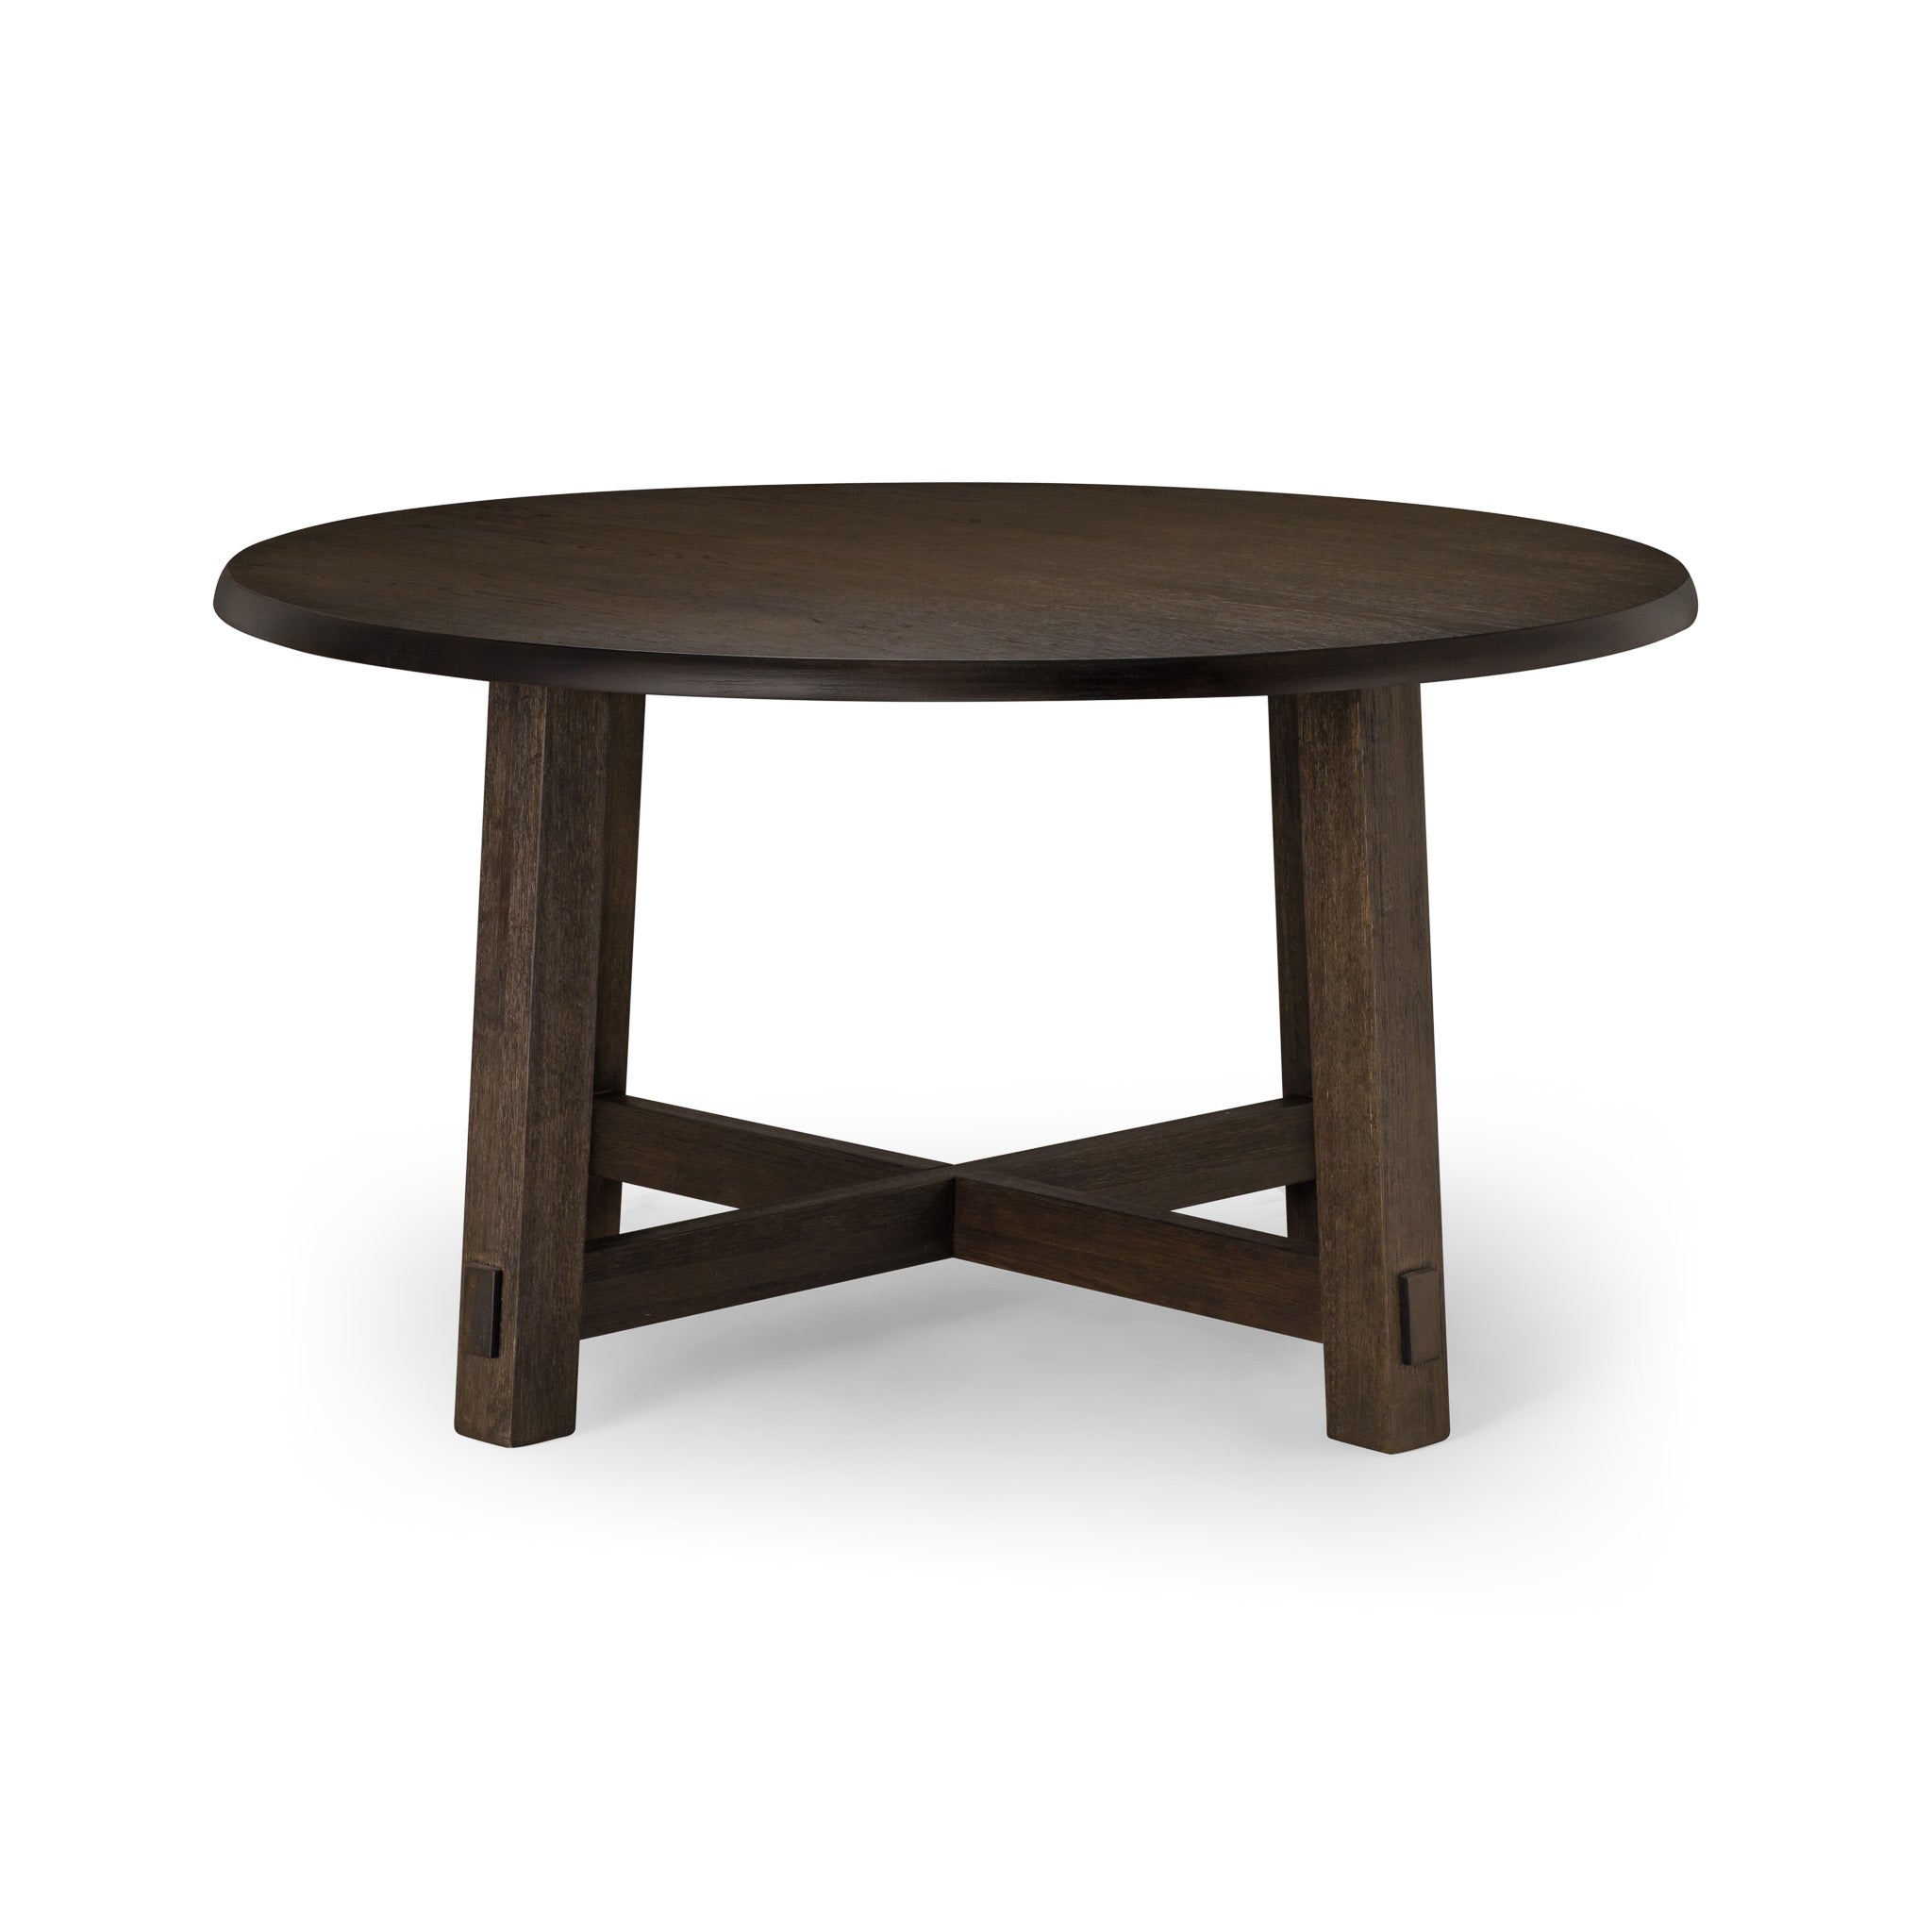 Sasha Organic Round Wooden Dining Table in Weathered Brown Finish in Dining Furniture by Maven Lane